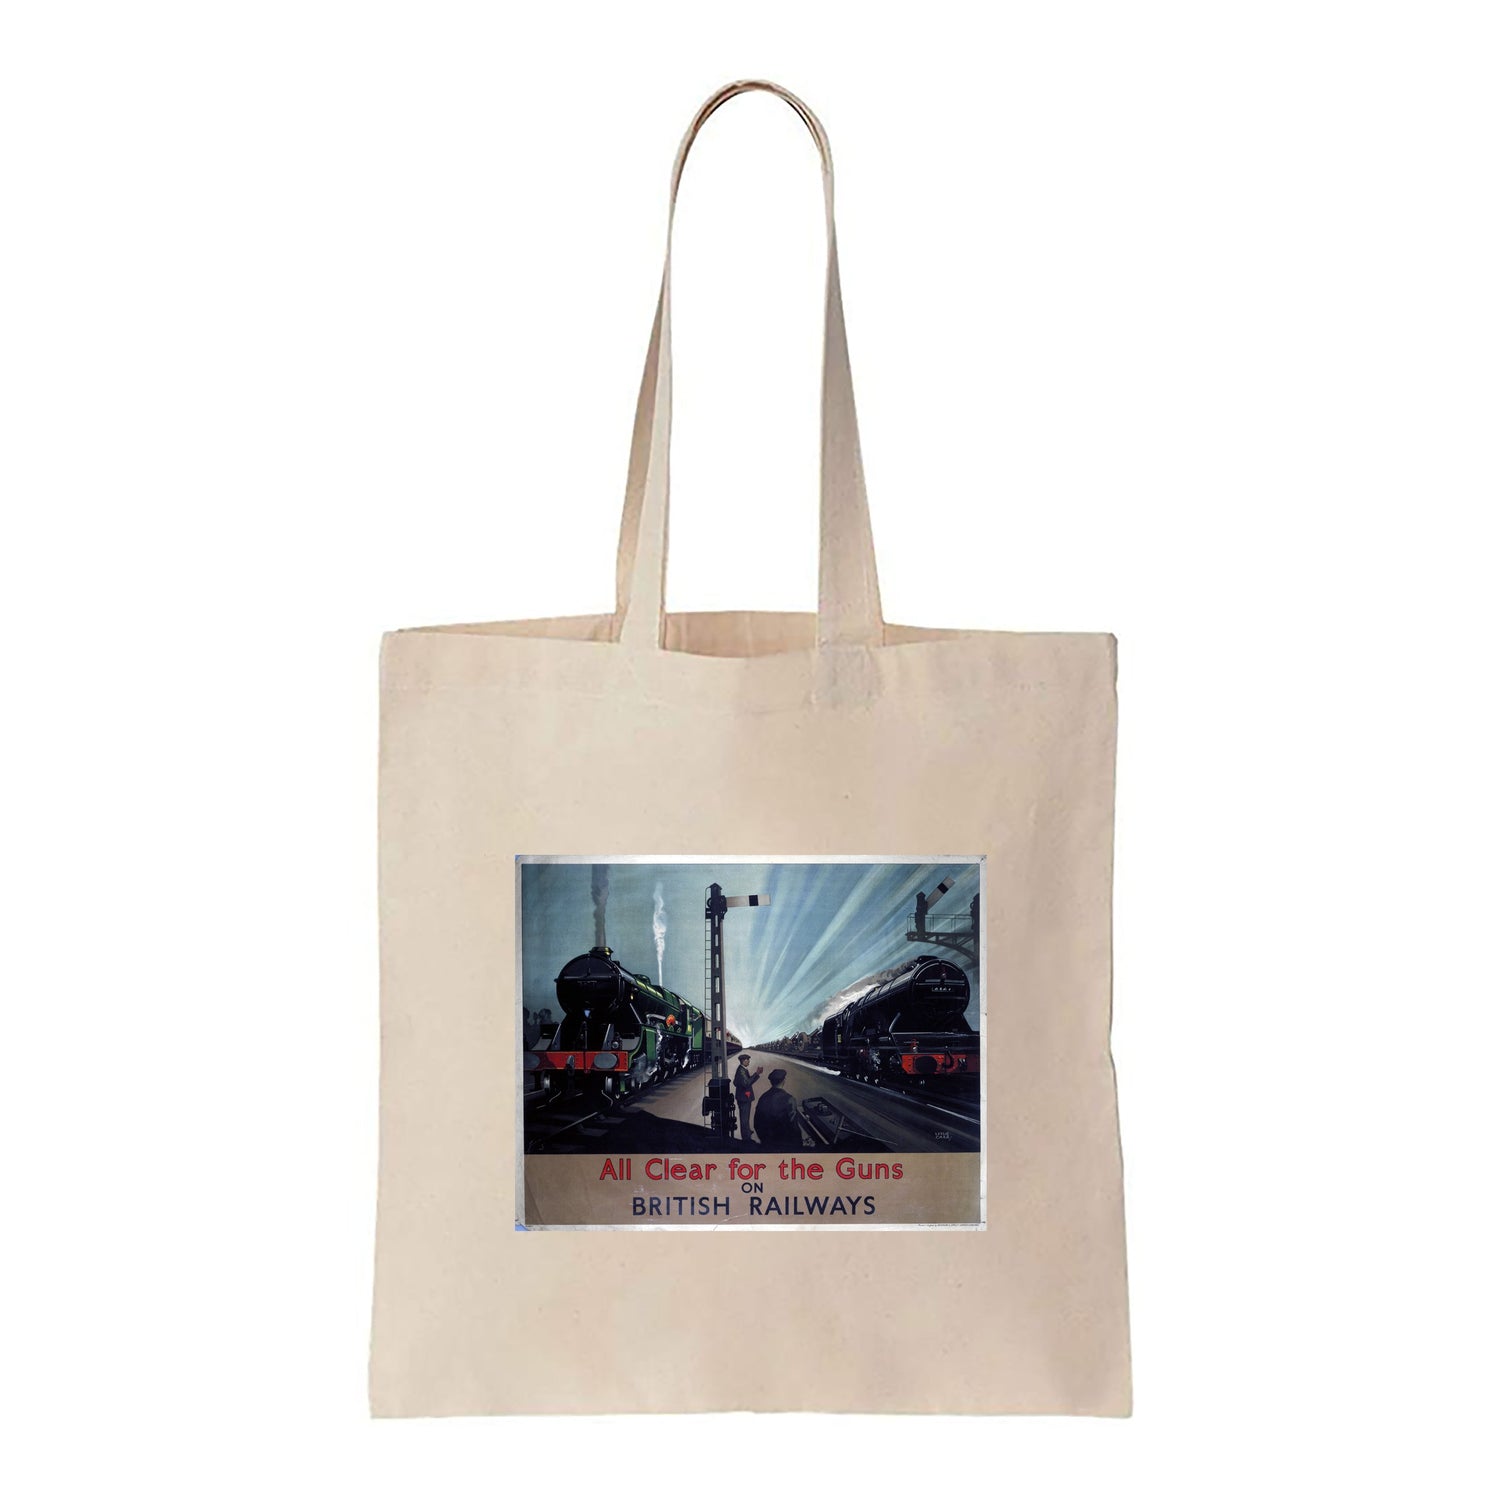 All Clear for the Guns on British Railways - Canvas Tote Bag